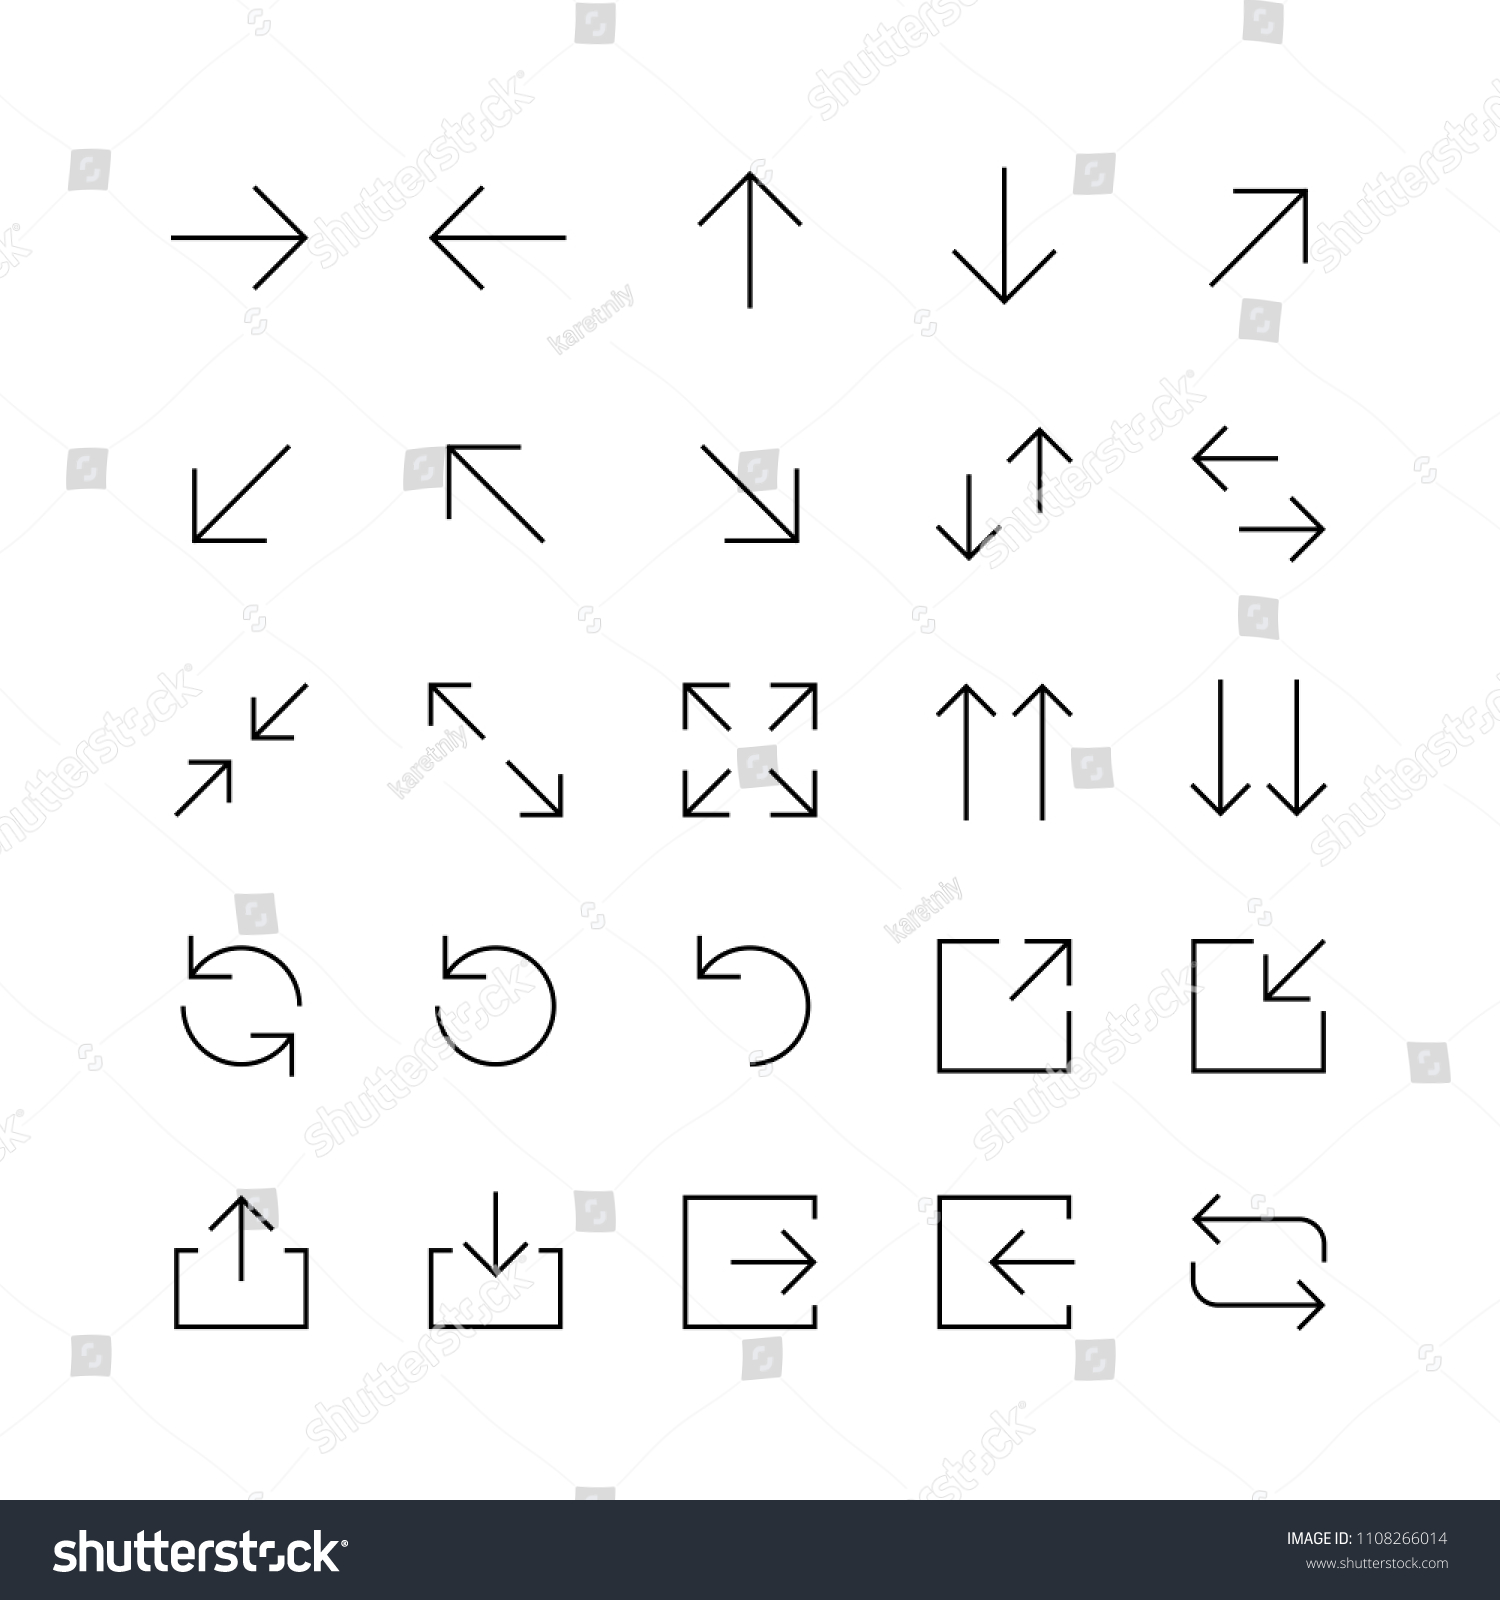 Set of seamless black arrows for mobile user interface and web design isolated on white background #1108266014